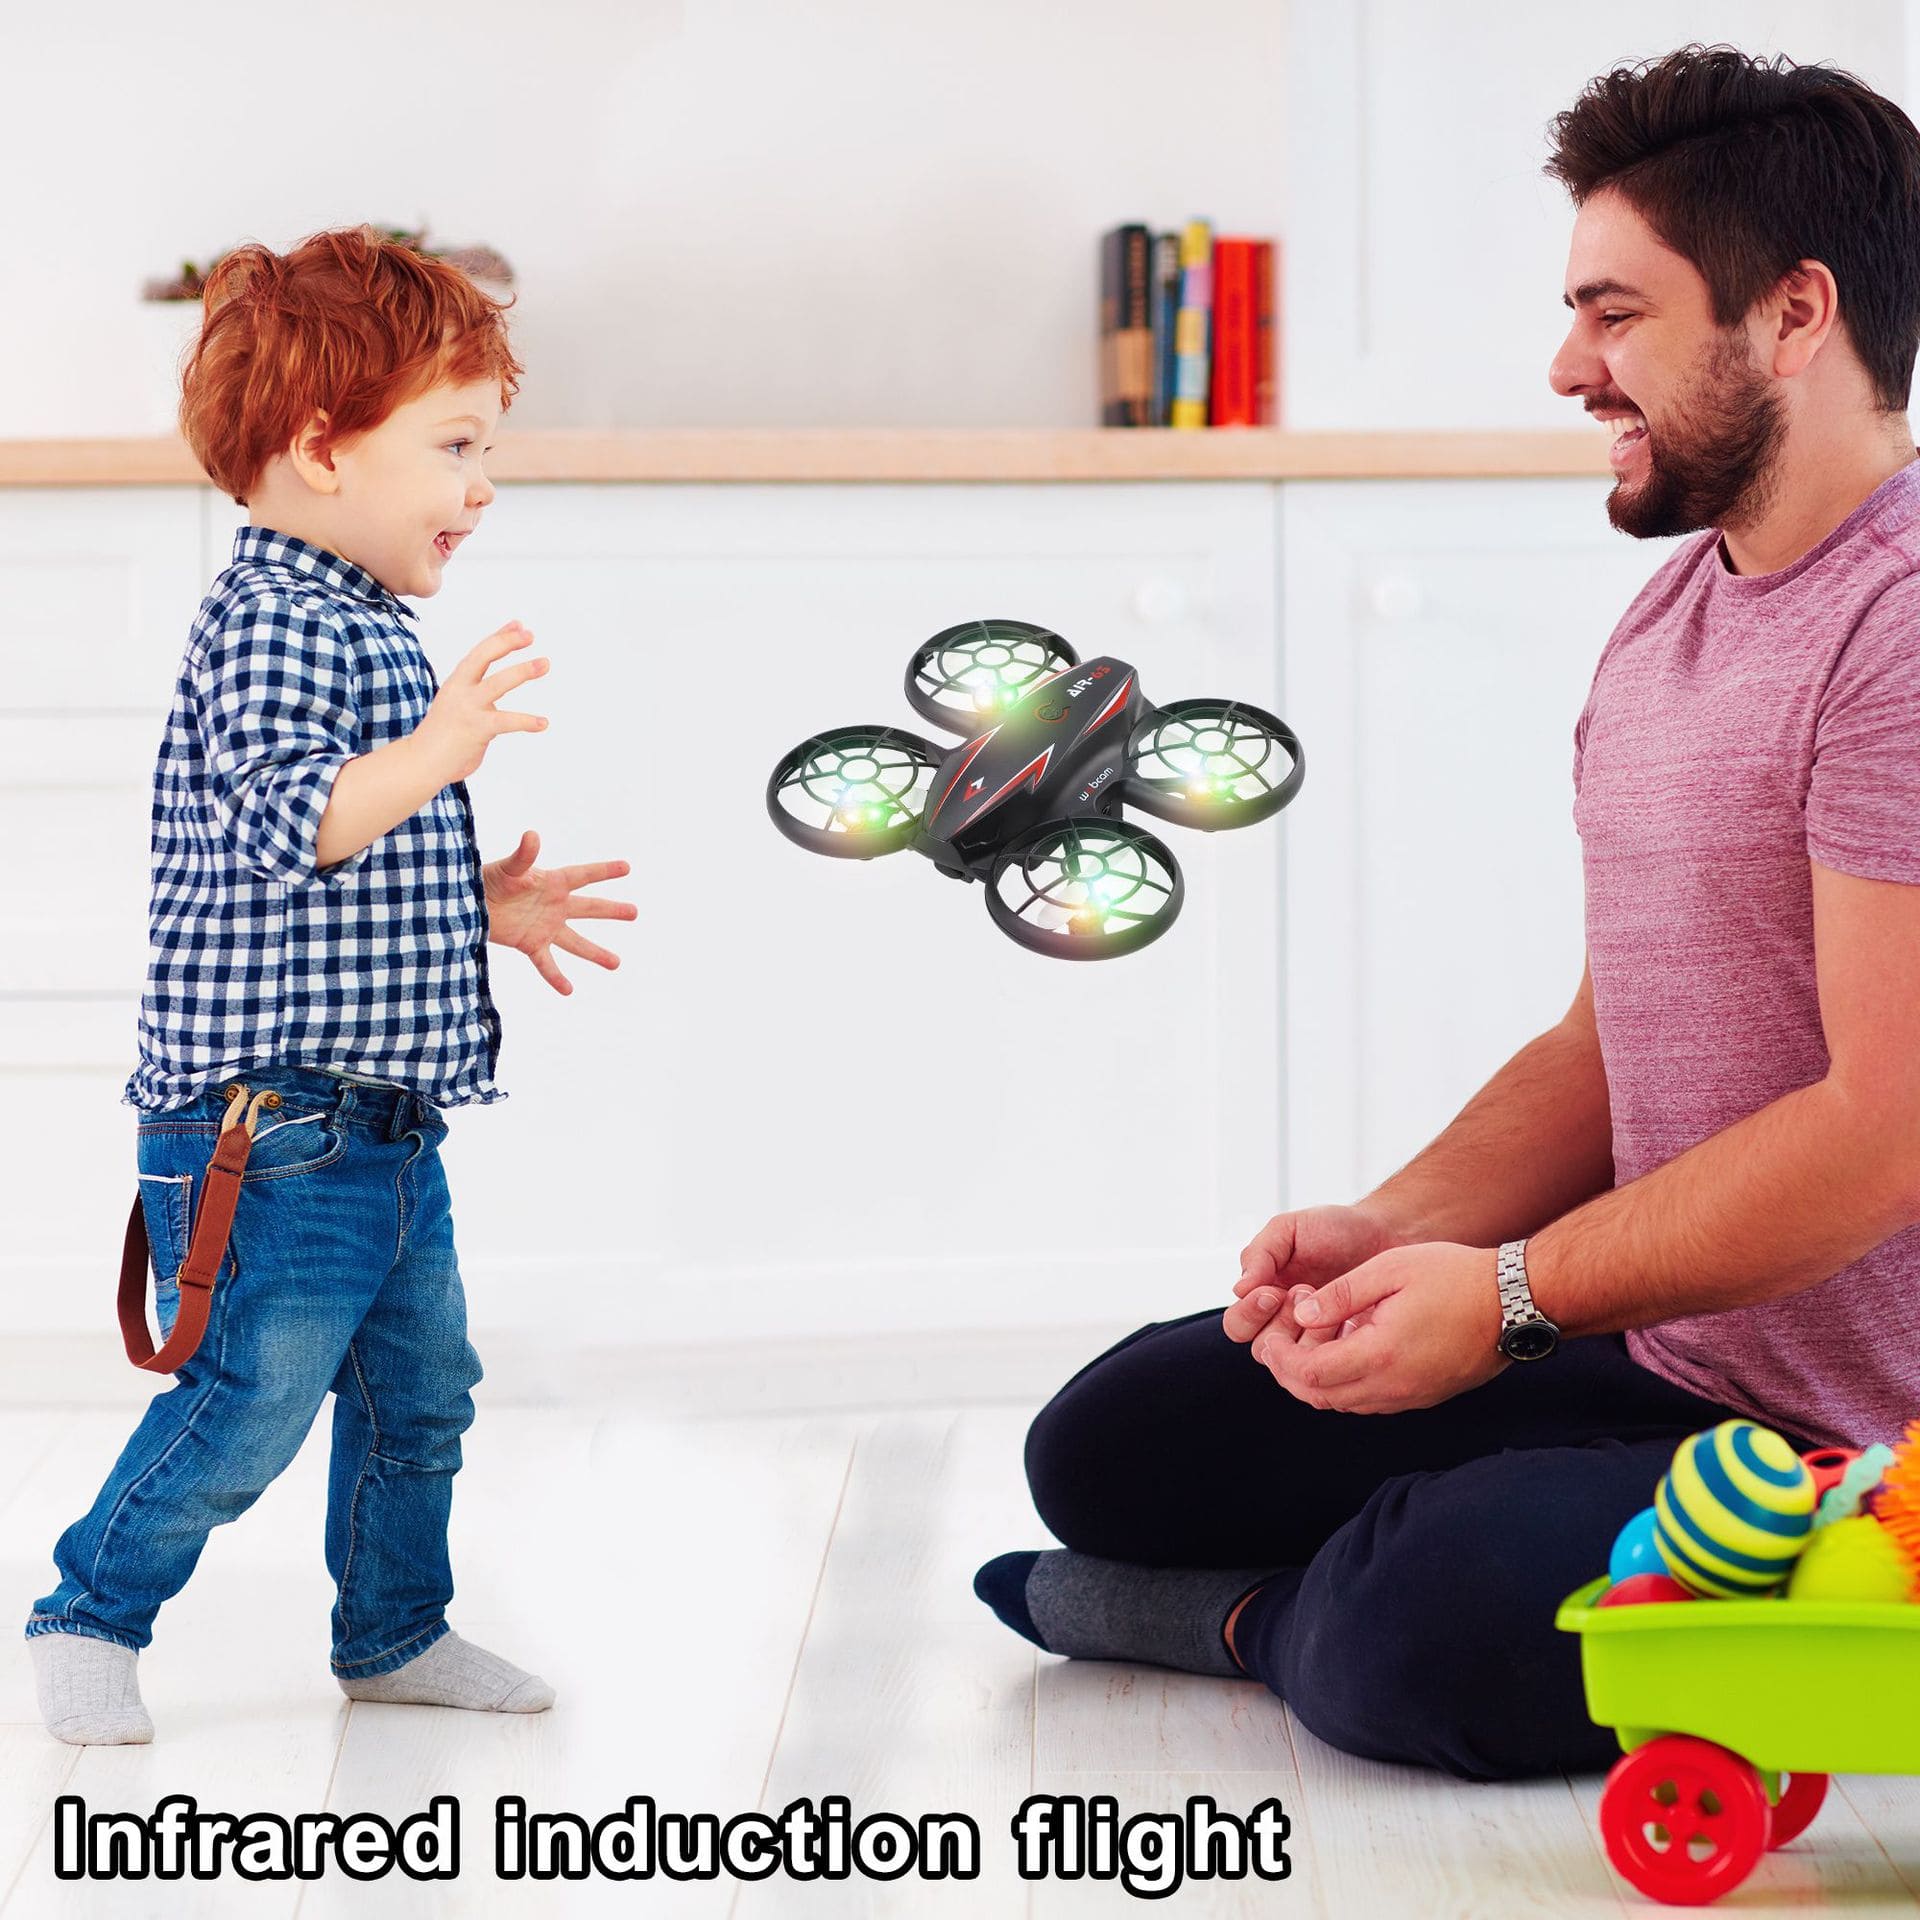 8K Camera HD Mini Ufo WIFI FPV Drones with Remote Control Helicopter for toys - Smart Tech Shopping